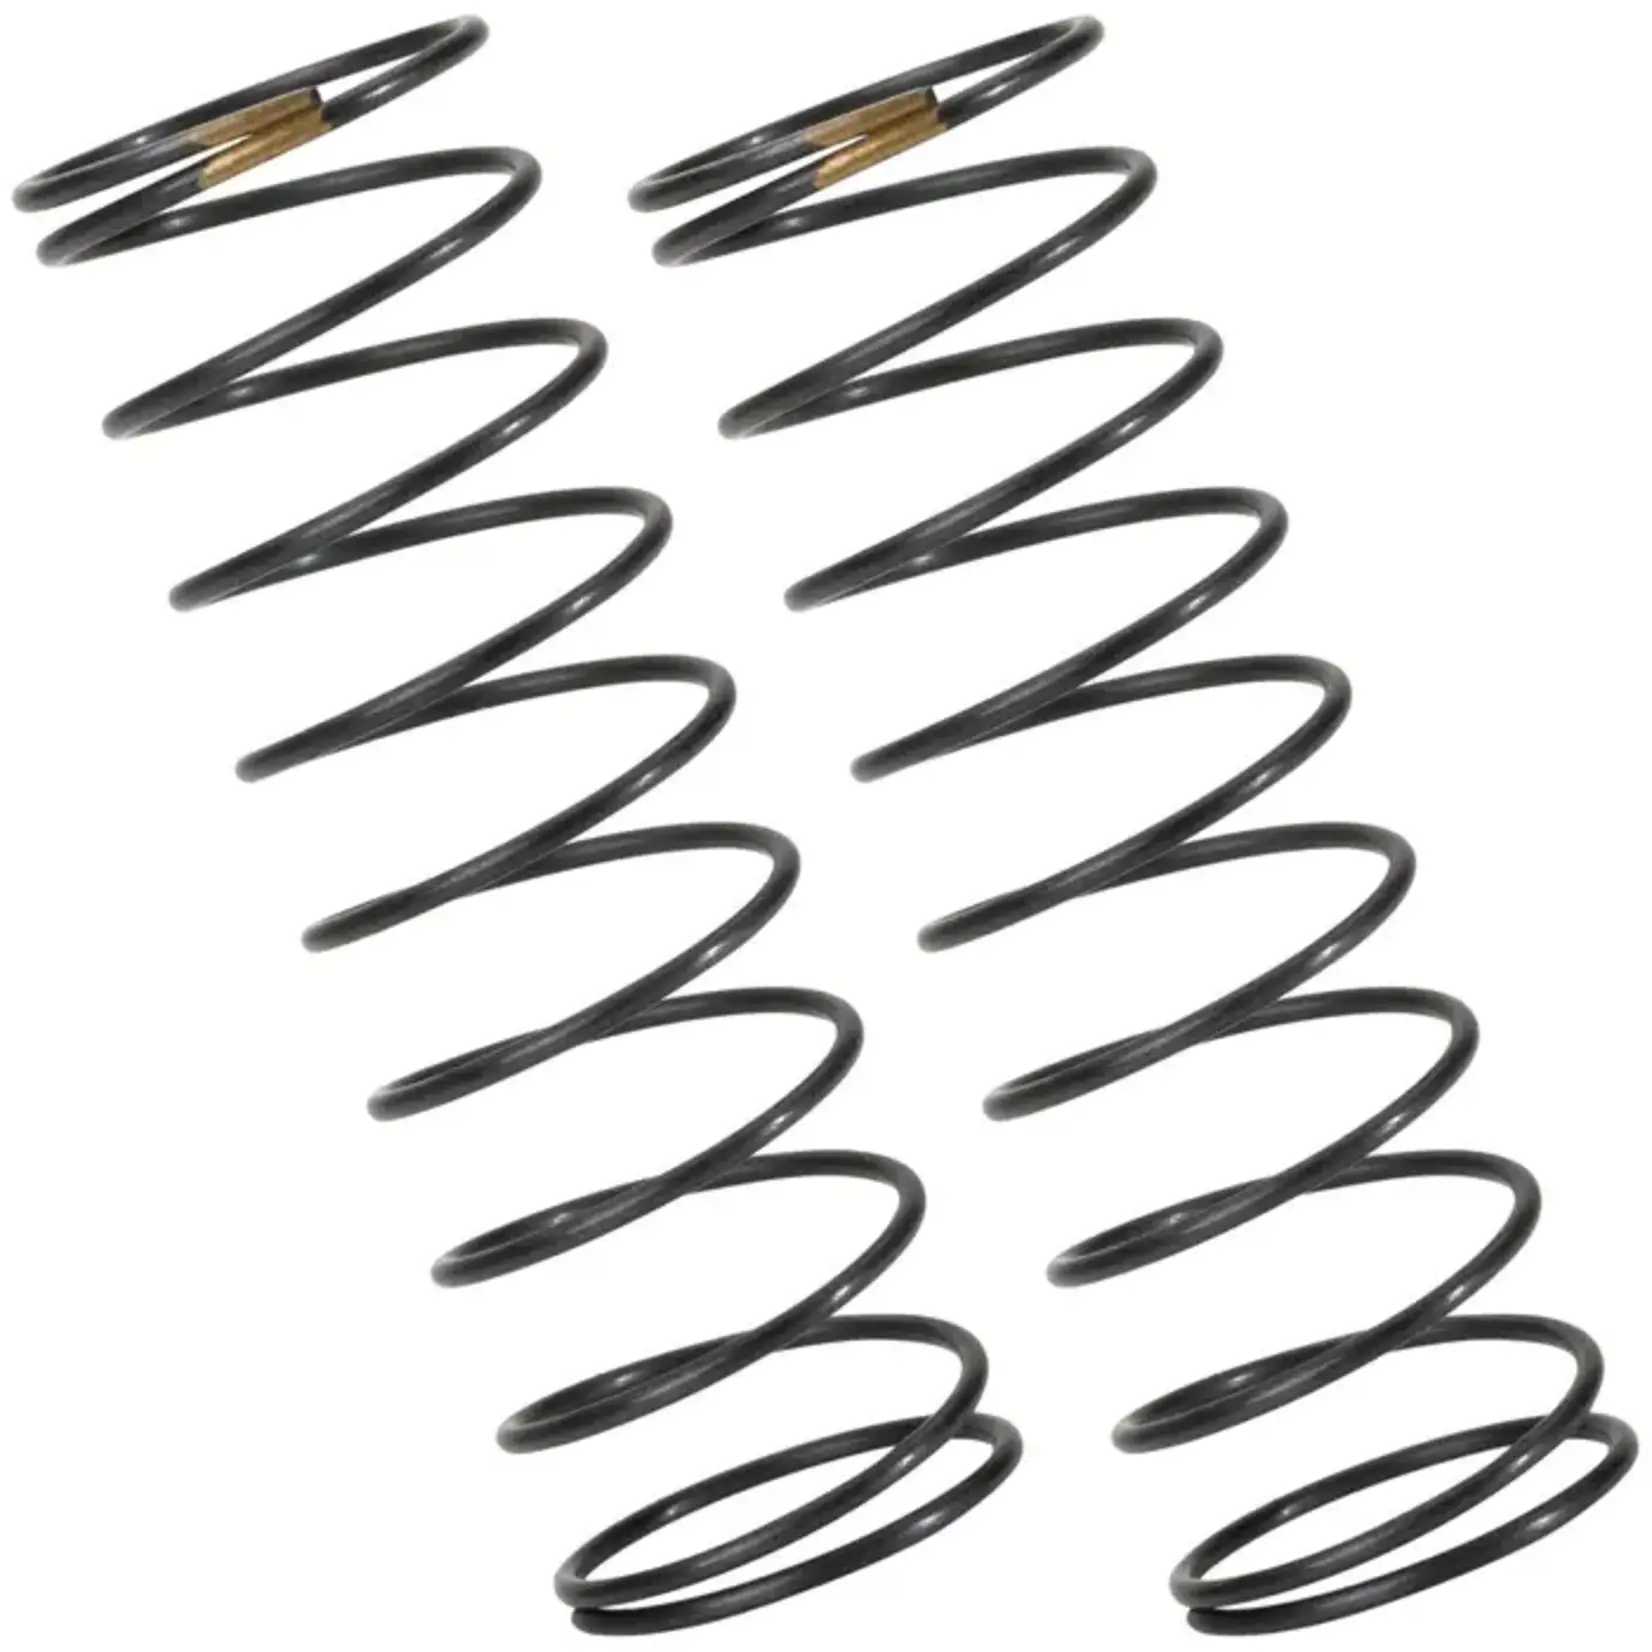 1UP 1UP10522 1Up Racing X-Gear 13mm Buggy Rear Springs - Soft 10.25T Gold